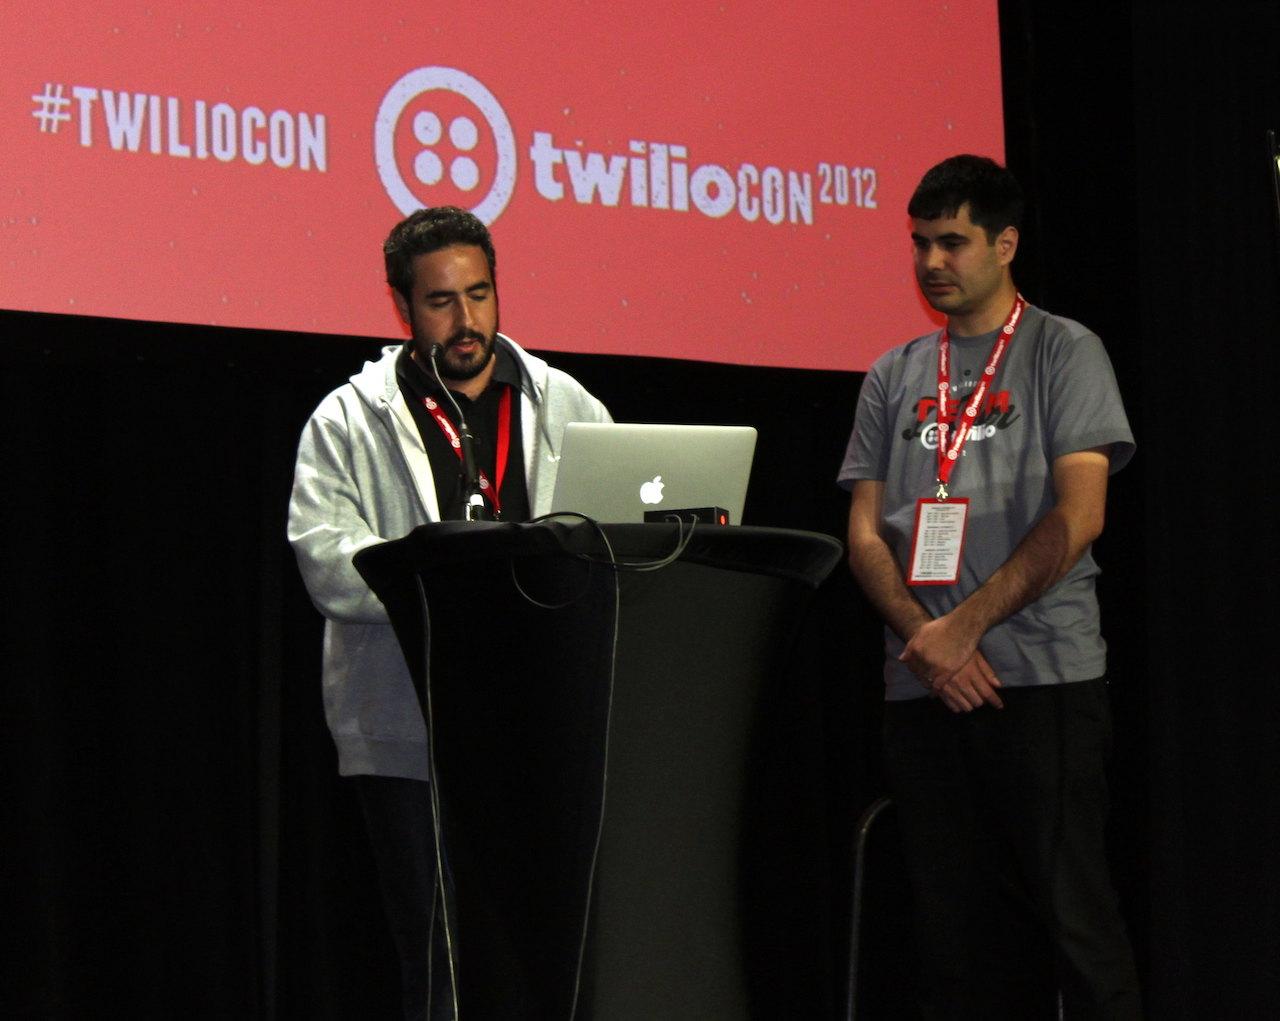 An S3 bucket misconfiguration caused Twilio users to load an extraneous URL on their browsers that has been associated with the Magecart attacks. Today’s columnist, Chris Kennedy of AttackIQ, offers tips for how security pros can use security control validation to offset misconfigurations or process problems. (Credit: CC BY 2.0)